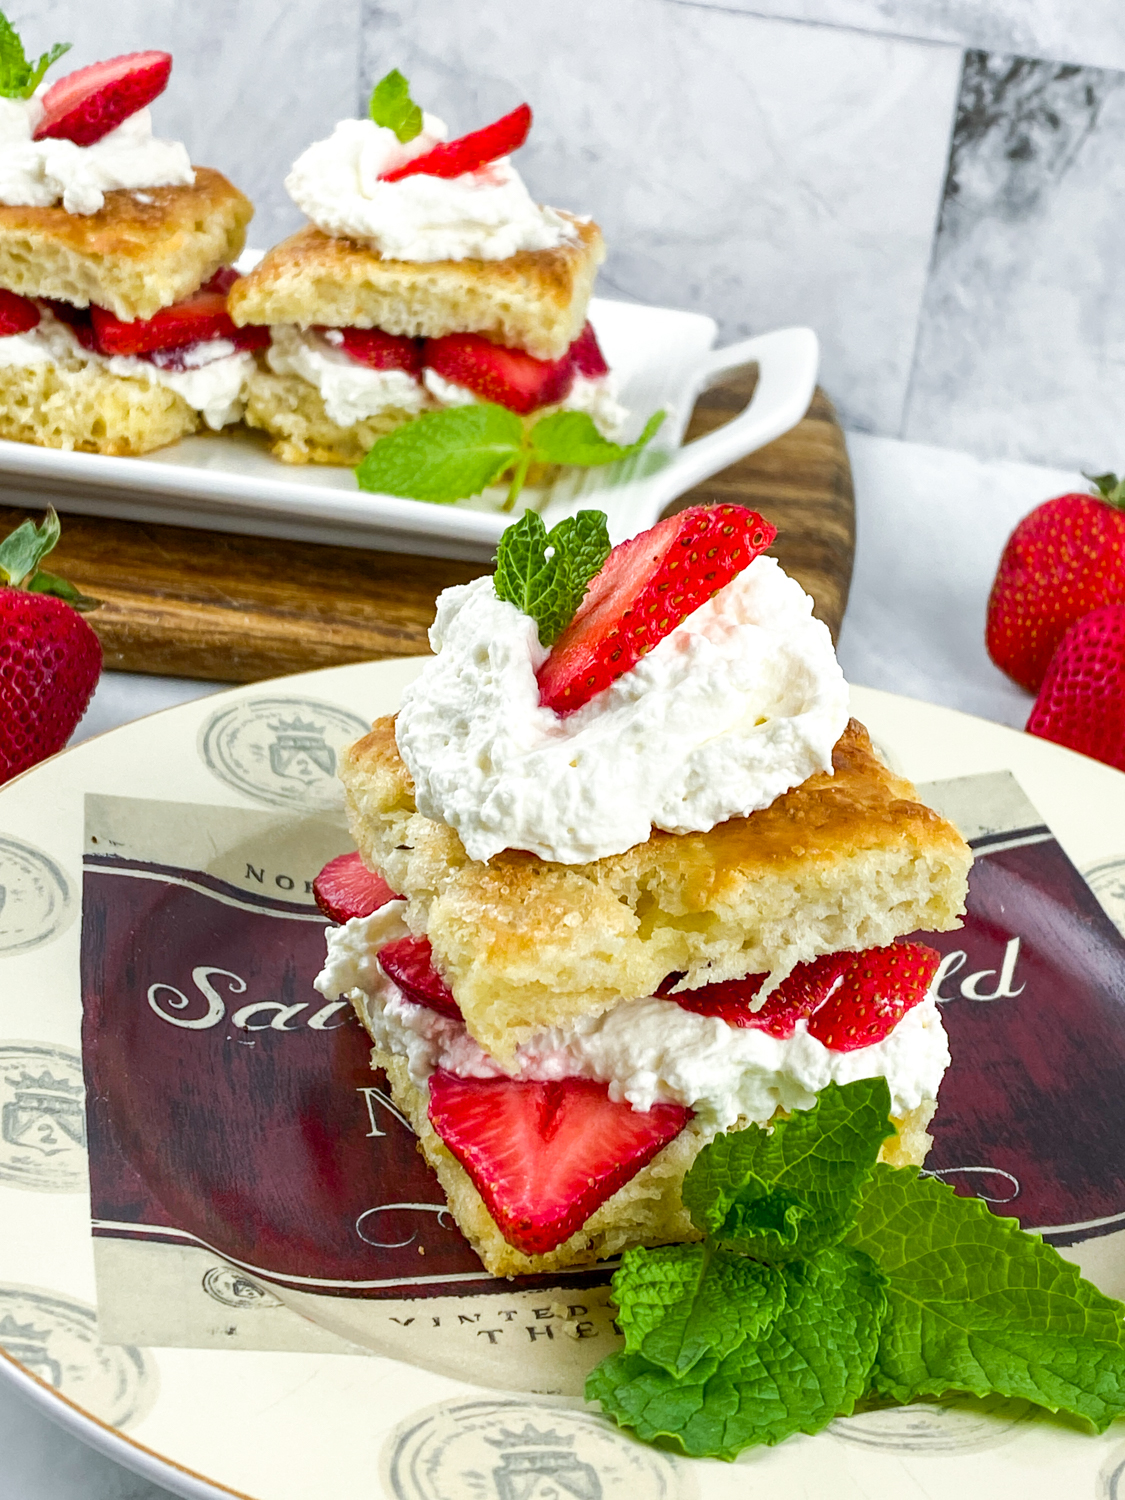 This is a traditional strawberry shortcake recipe made from scratch with fluffy shortcake, fresh macerated strawberries & real whipped cream.